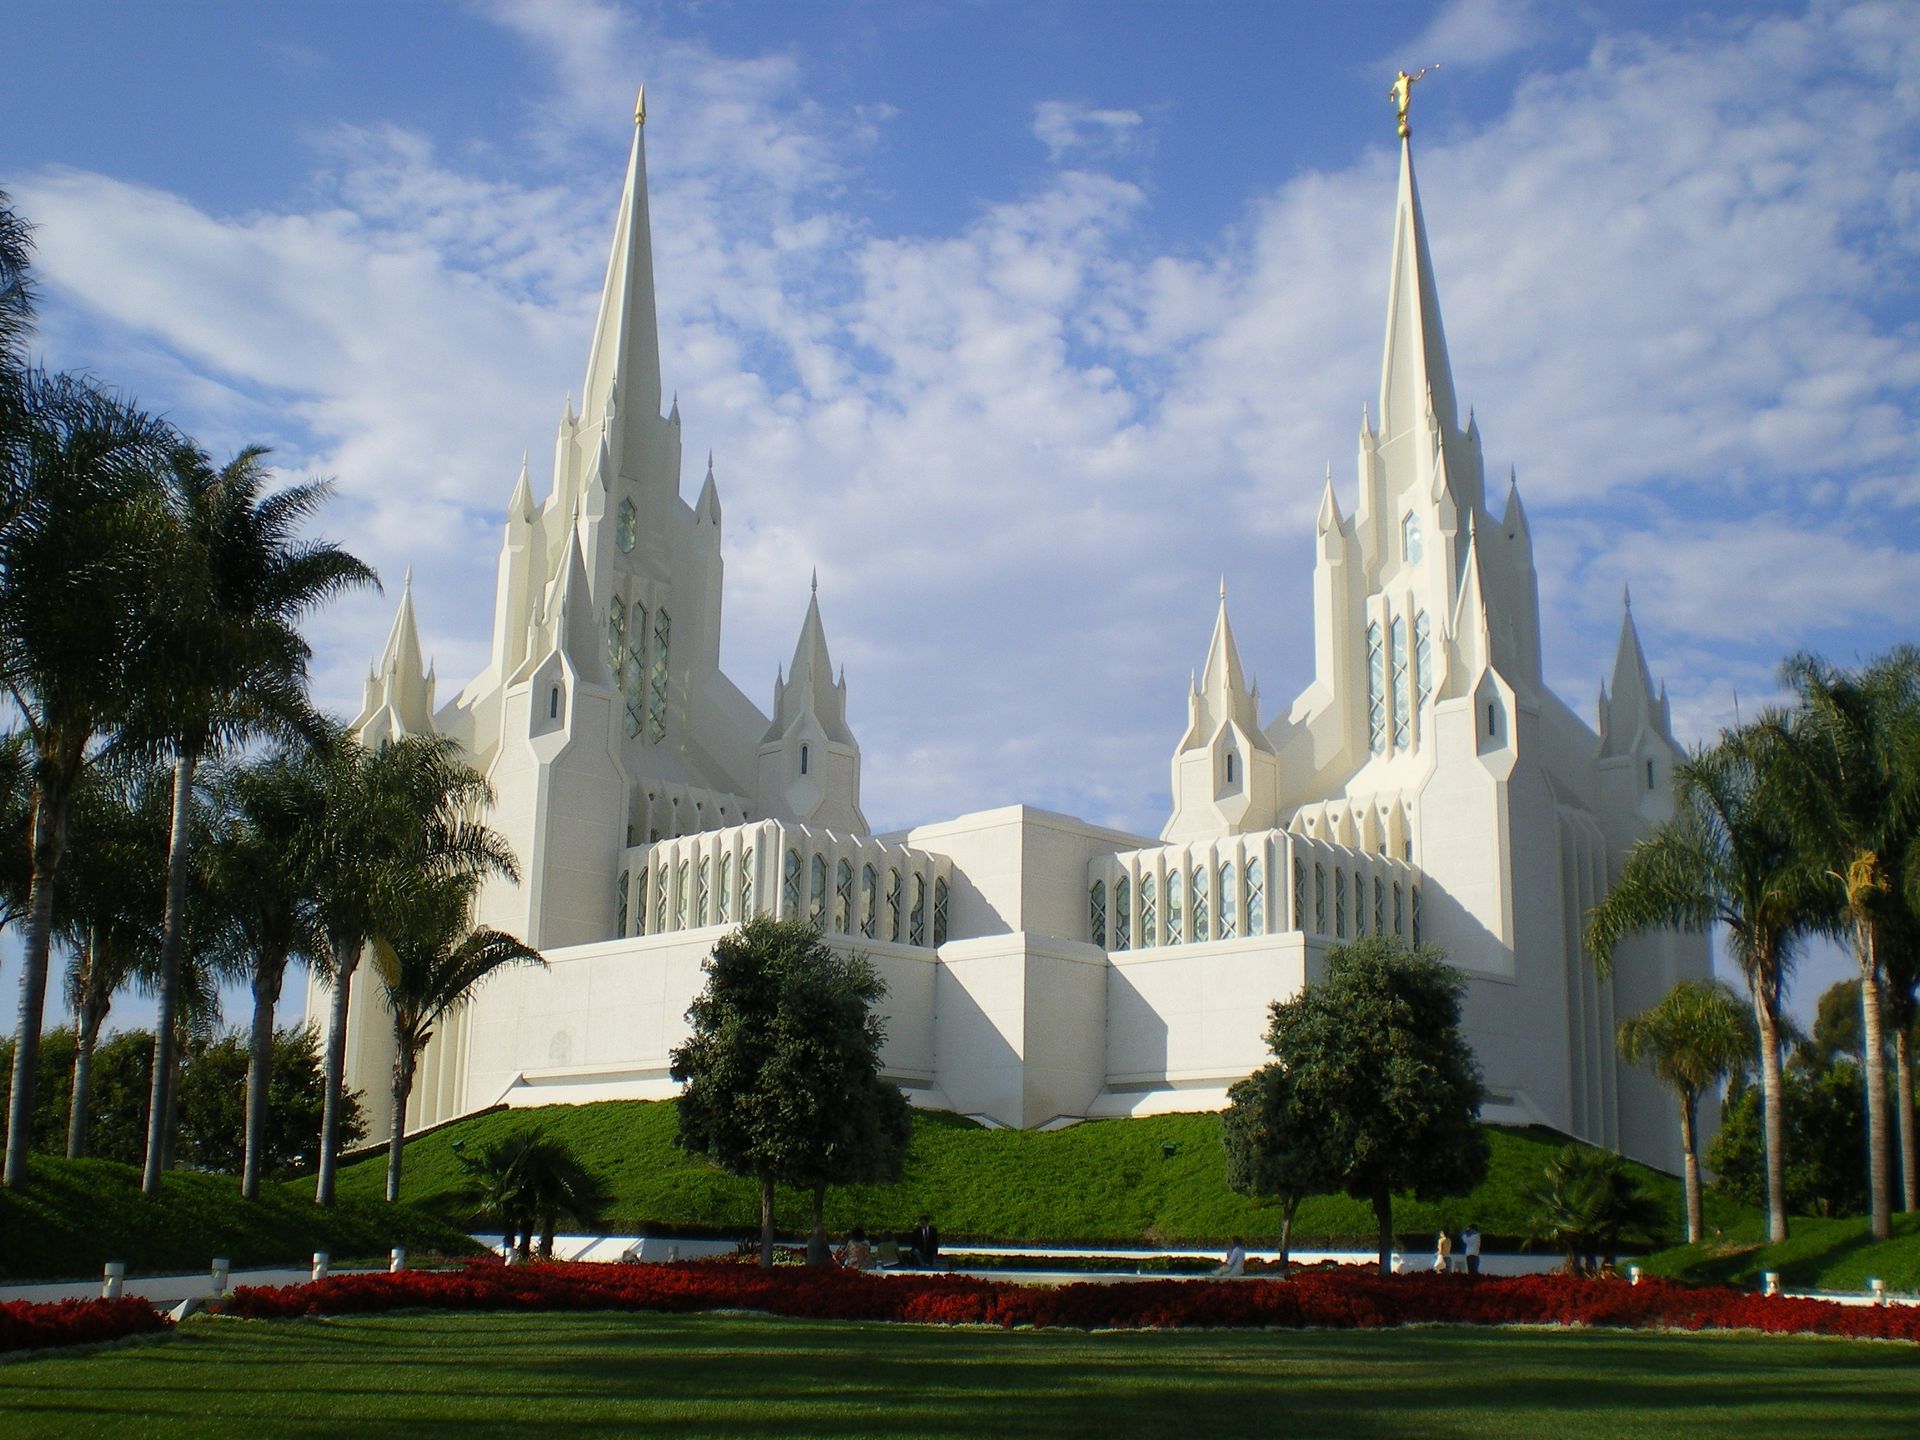 The entire San Diego California Temple, including scenery.